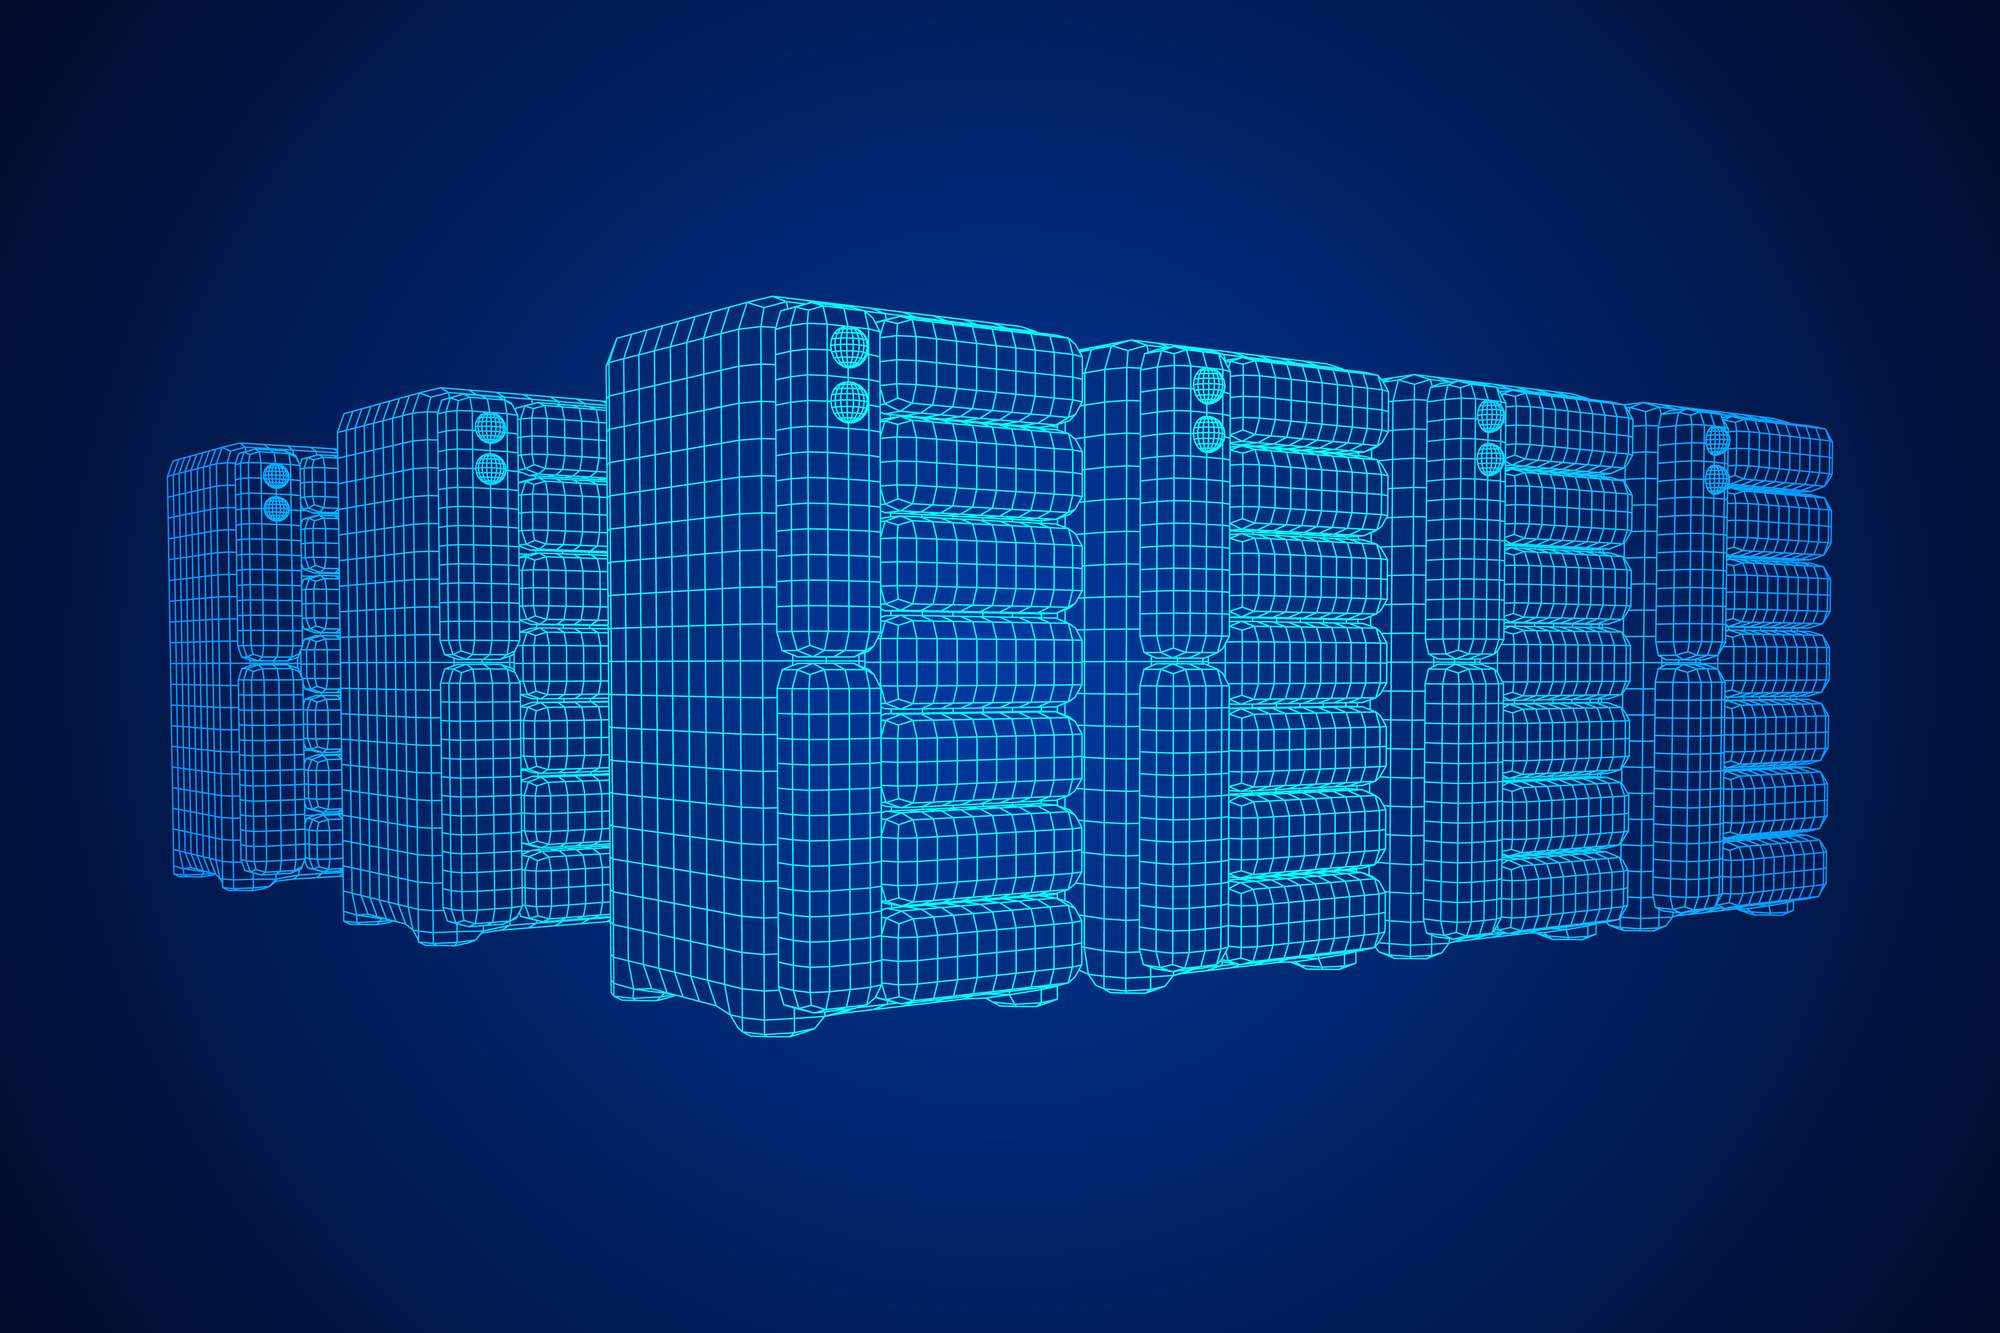 A wireframe mockup of the cloud server farms used by providers